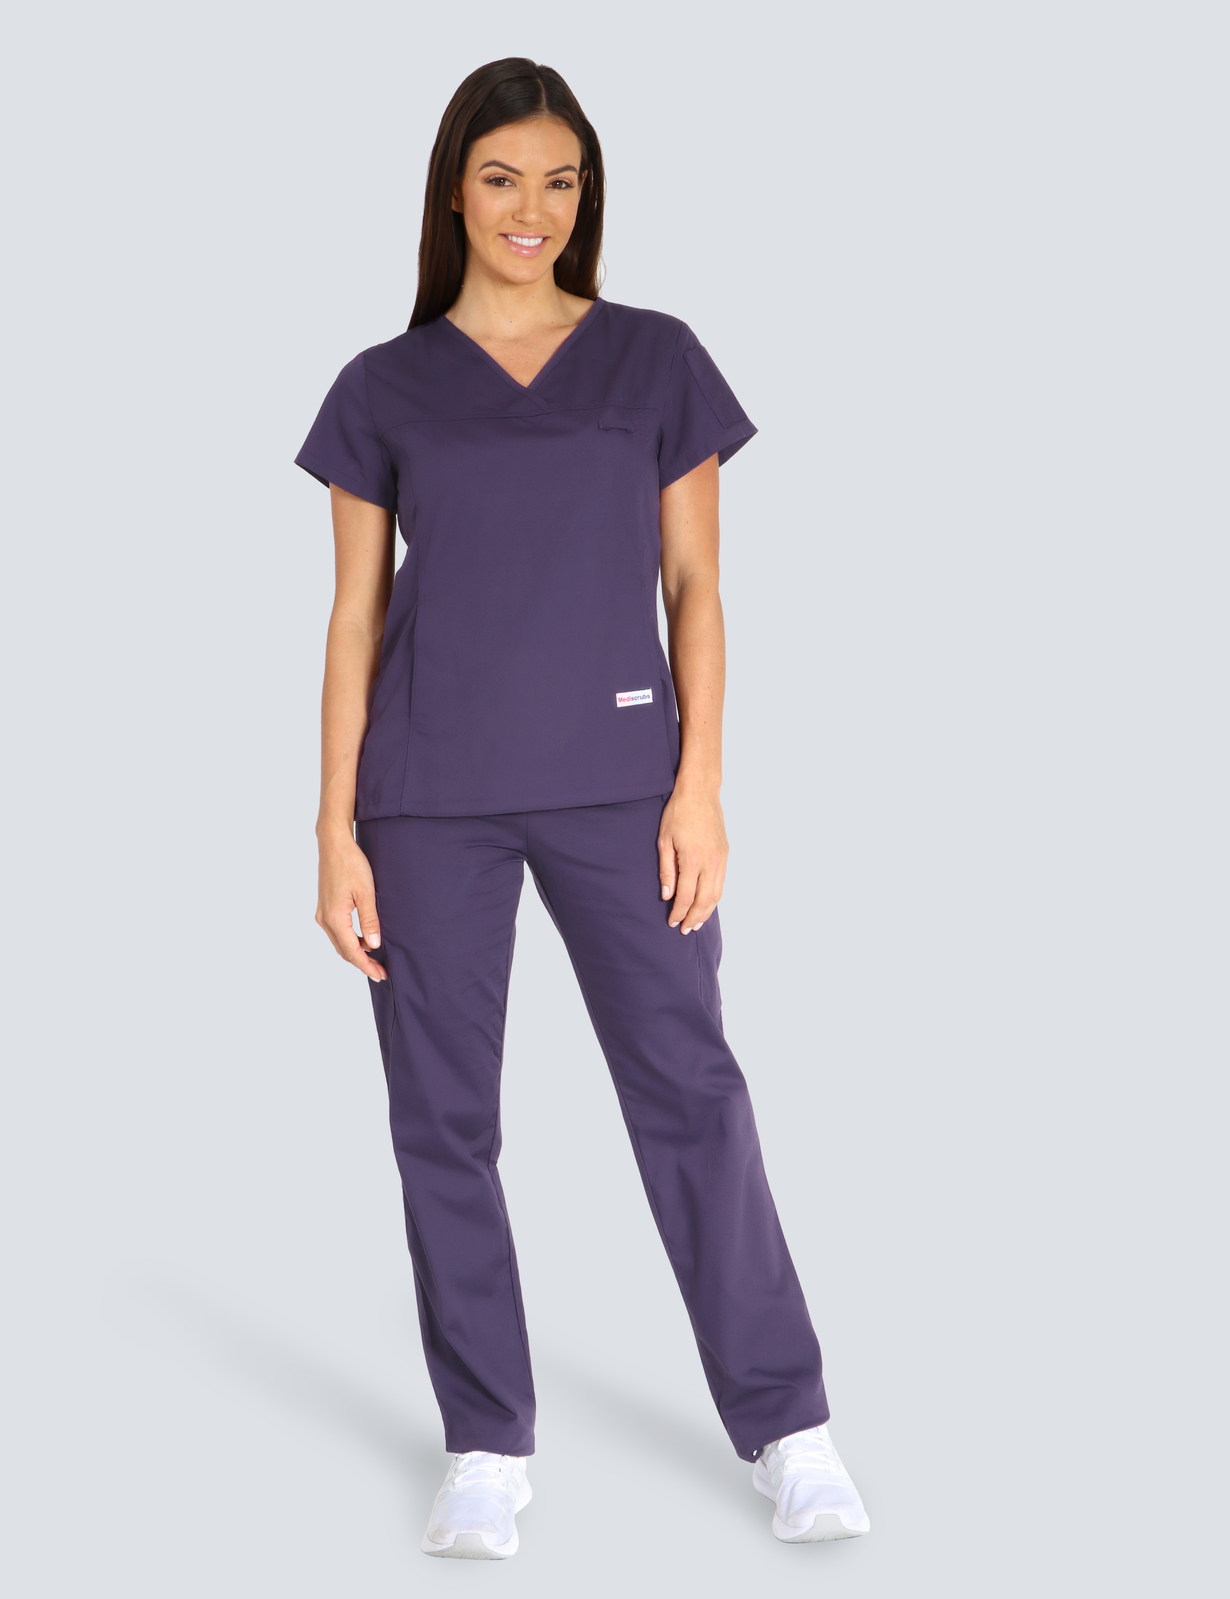 Toowoomba Hospital Pharmacy Assistant Uniform Set Bundle (Wome'ns Fit Solid Top and Cargo Pants in Aubergine incl Logo) 